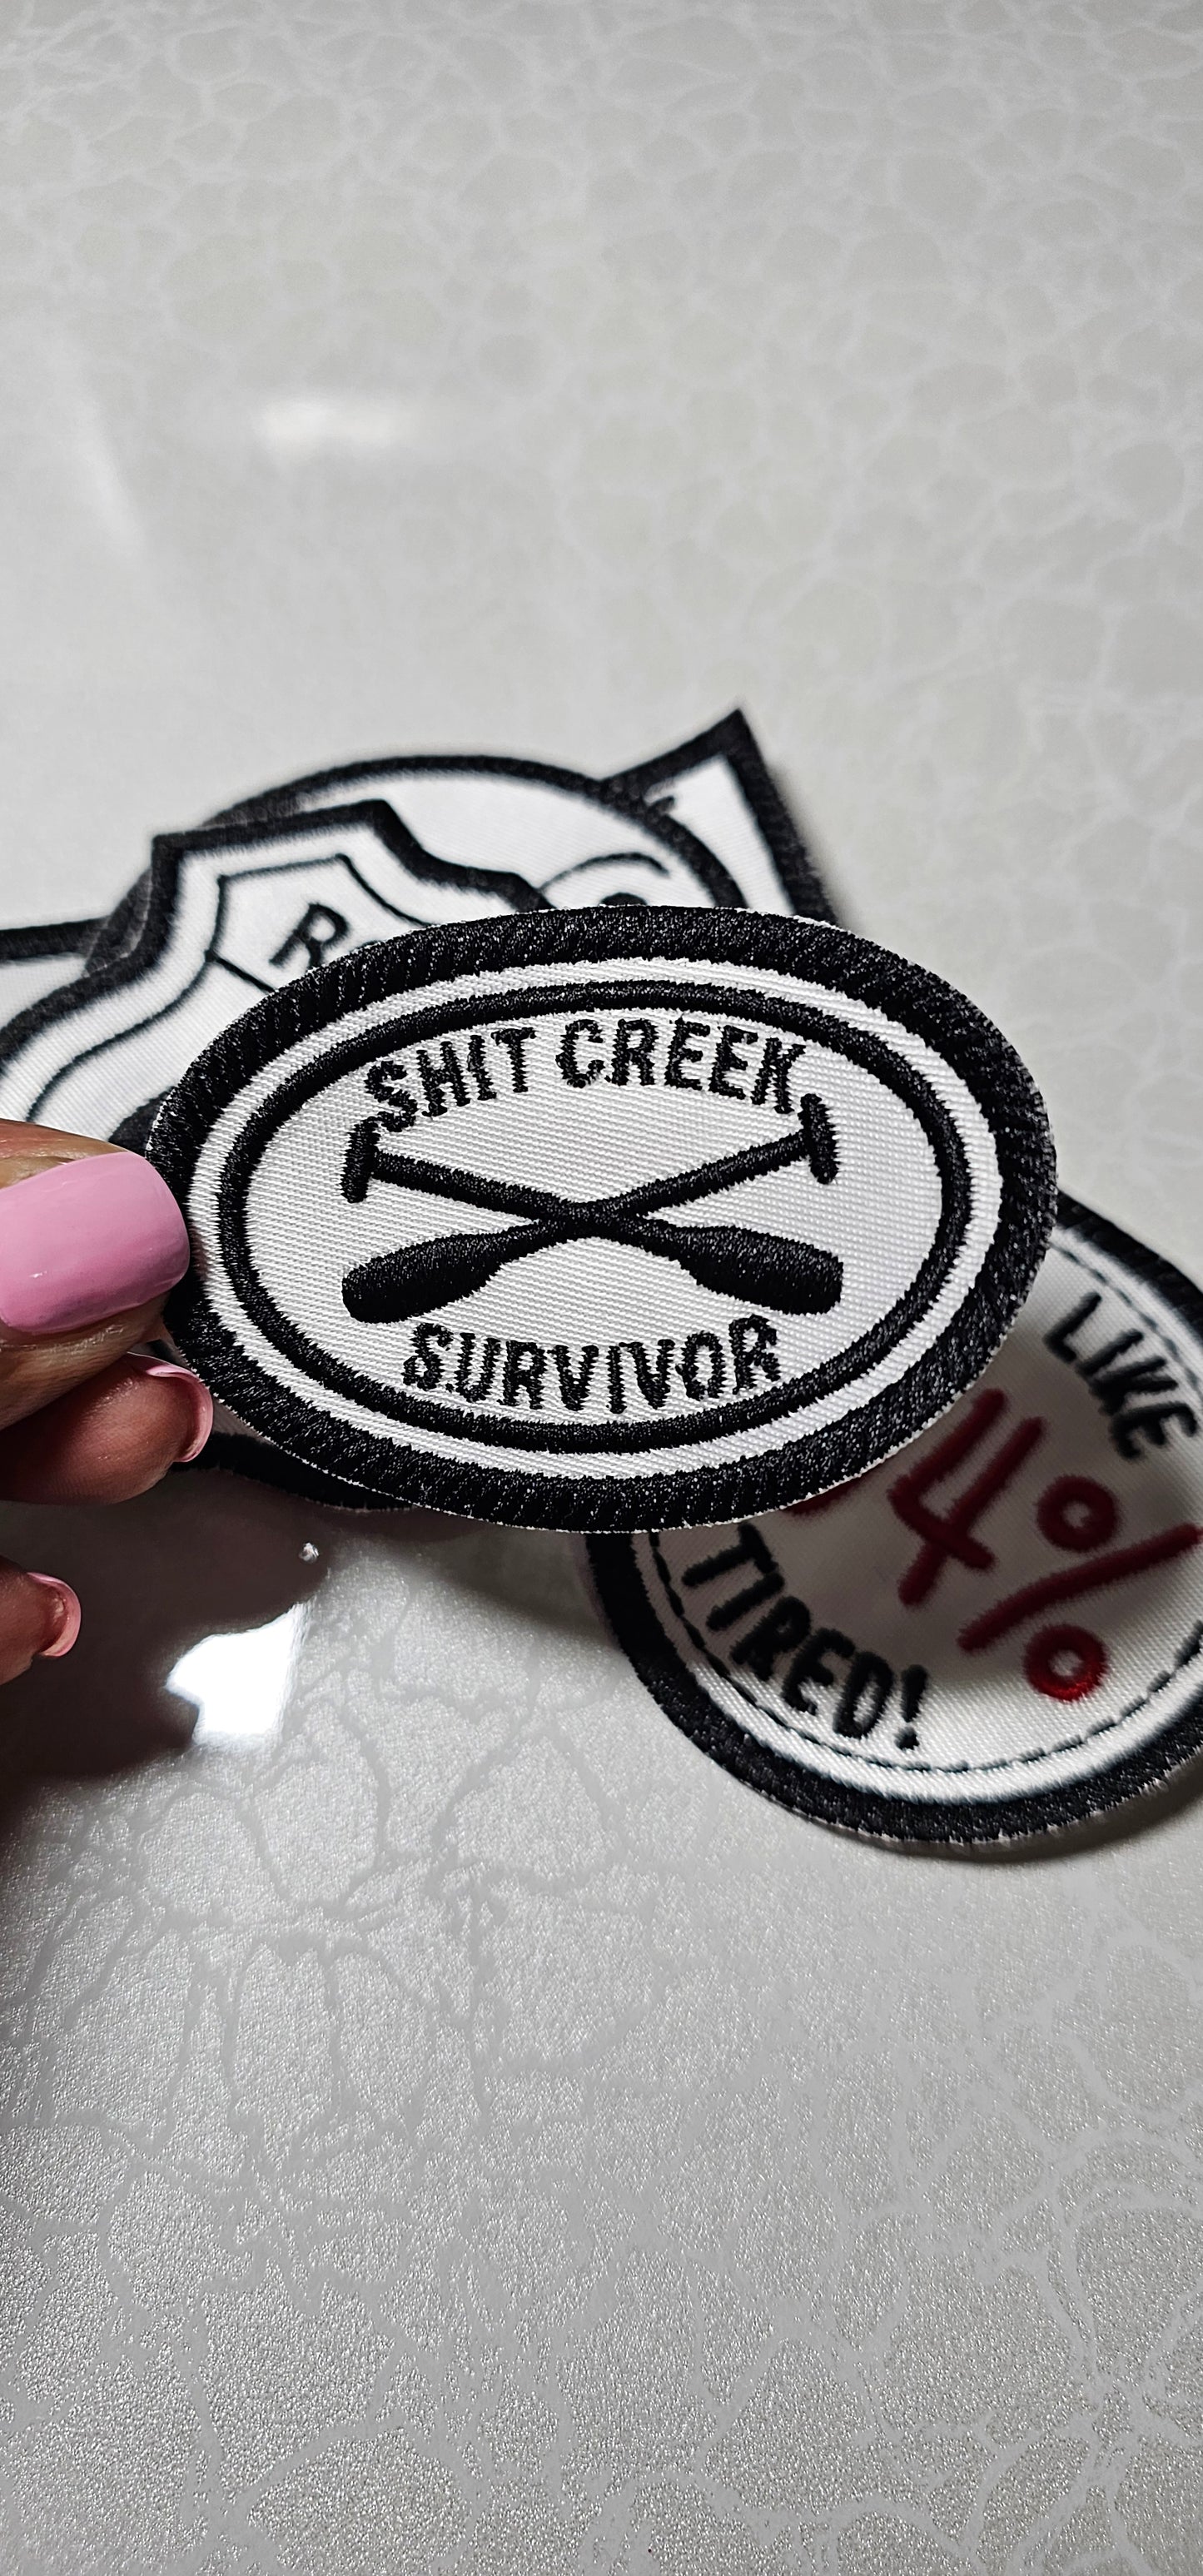 Embroidered Shit Creek Survivor Iron On Patch